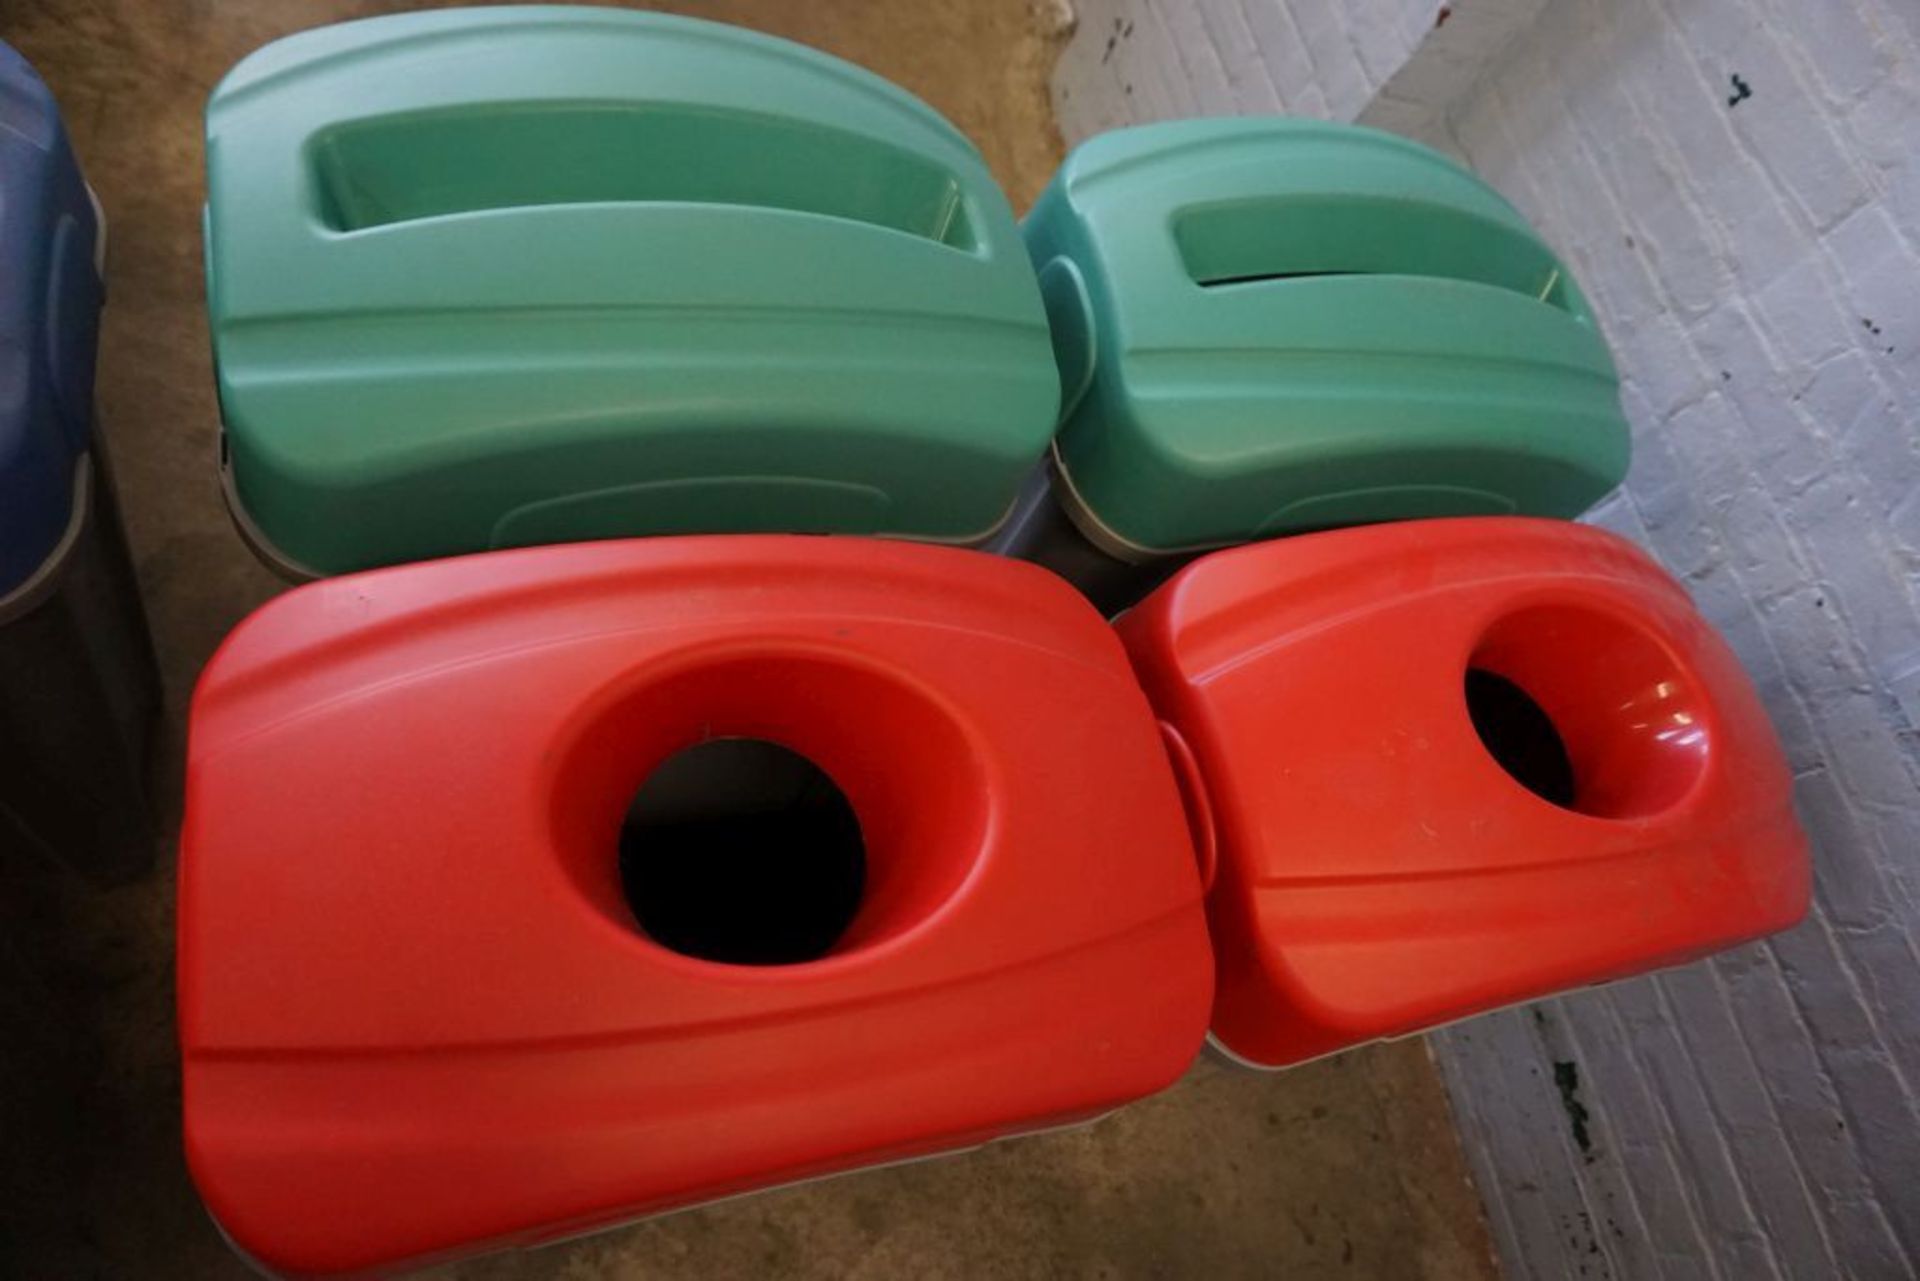 Lot of (6) Recycling/Waste Bins|Lot Tag: 846 - Image 3 of 3